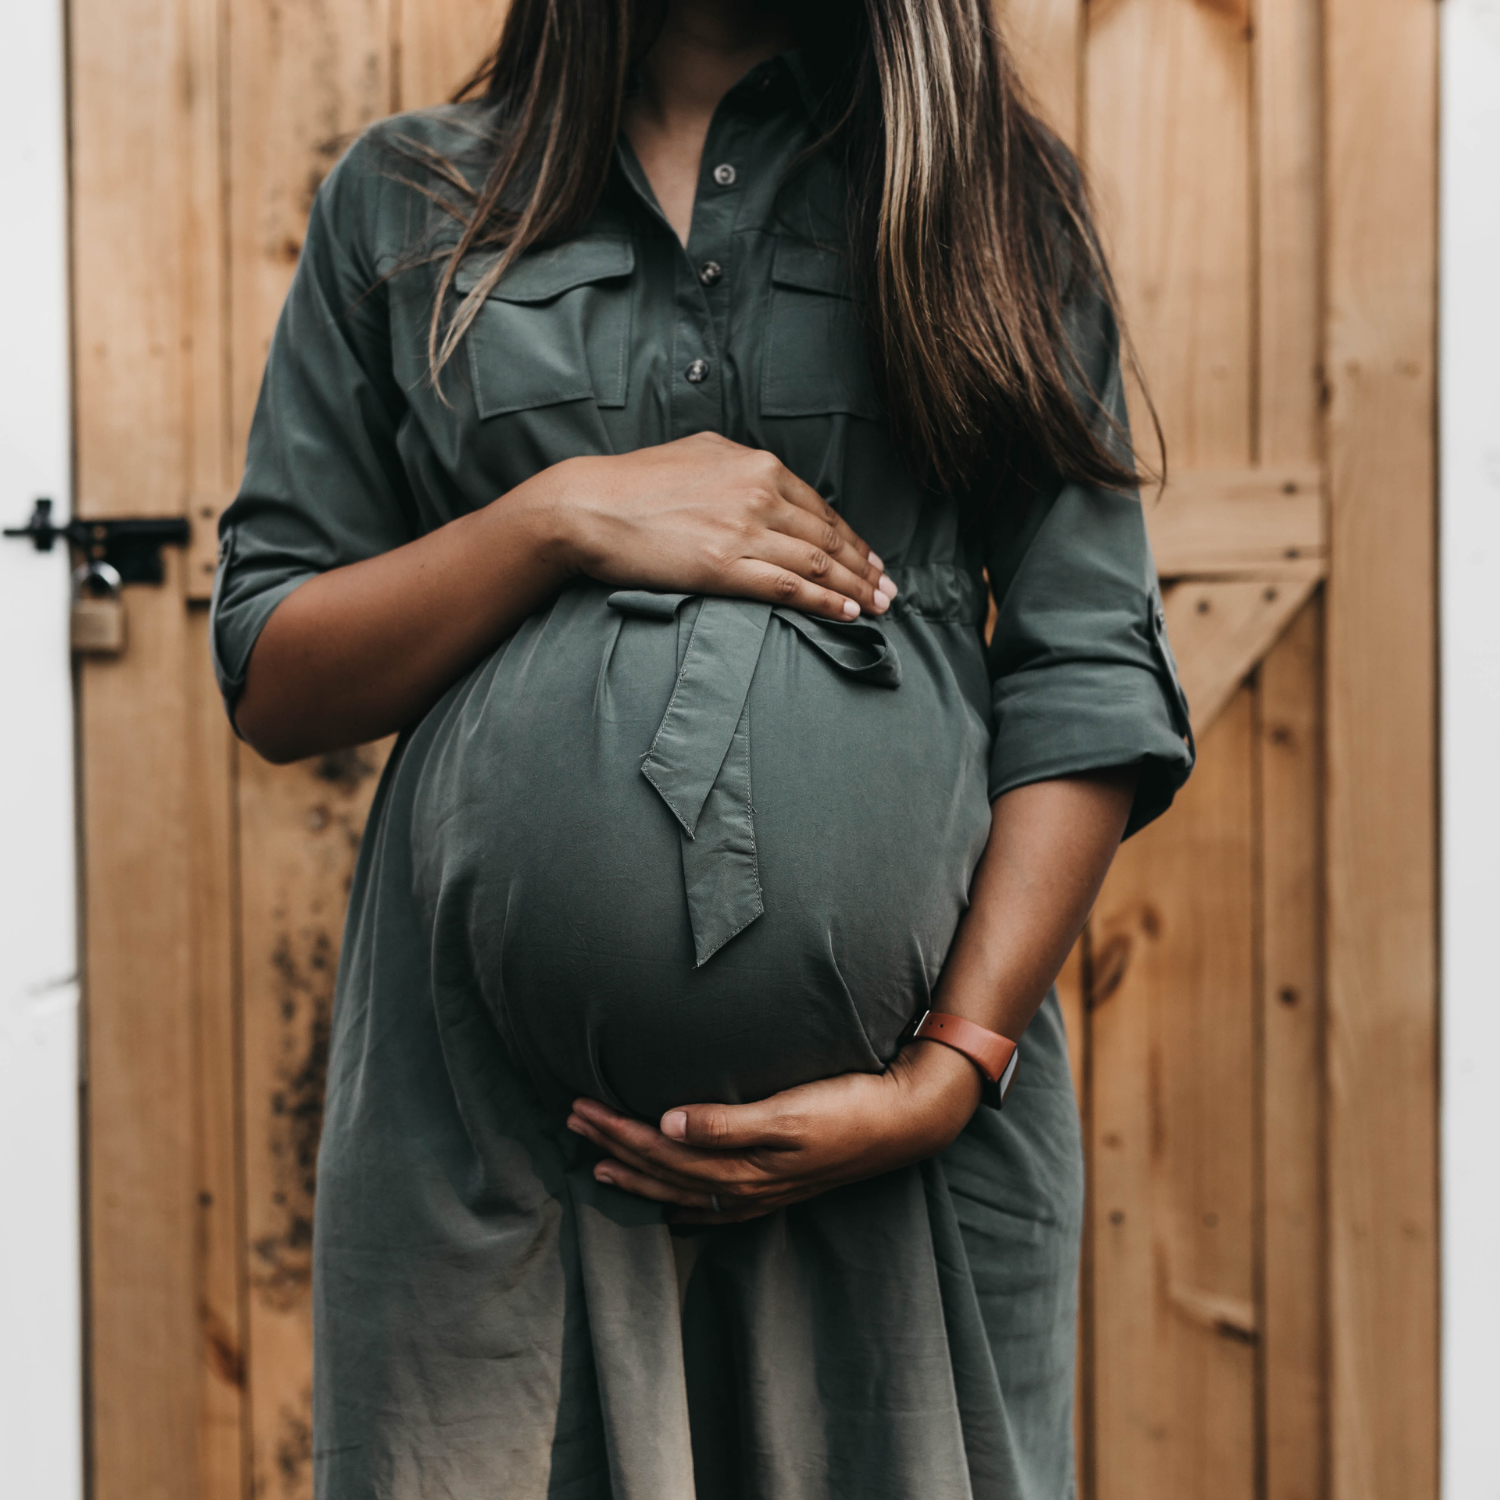 Pregnant woman with baby bump